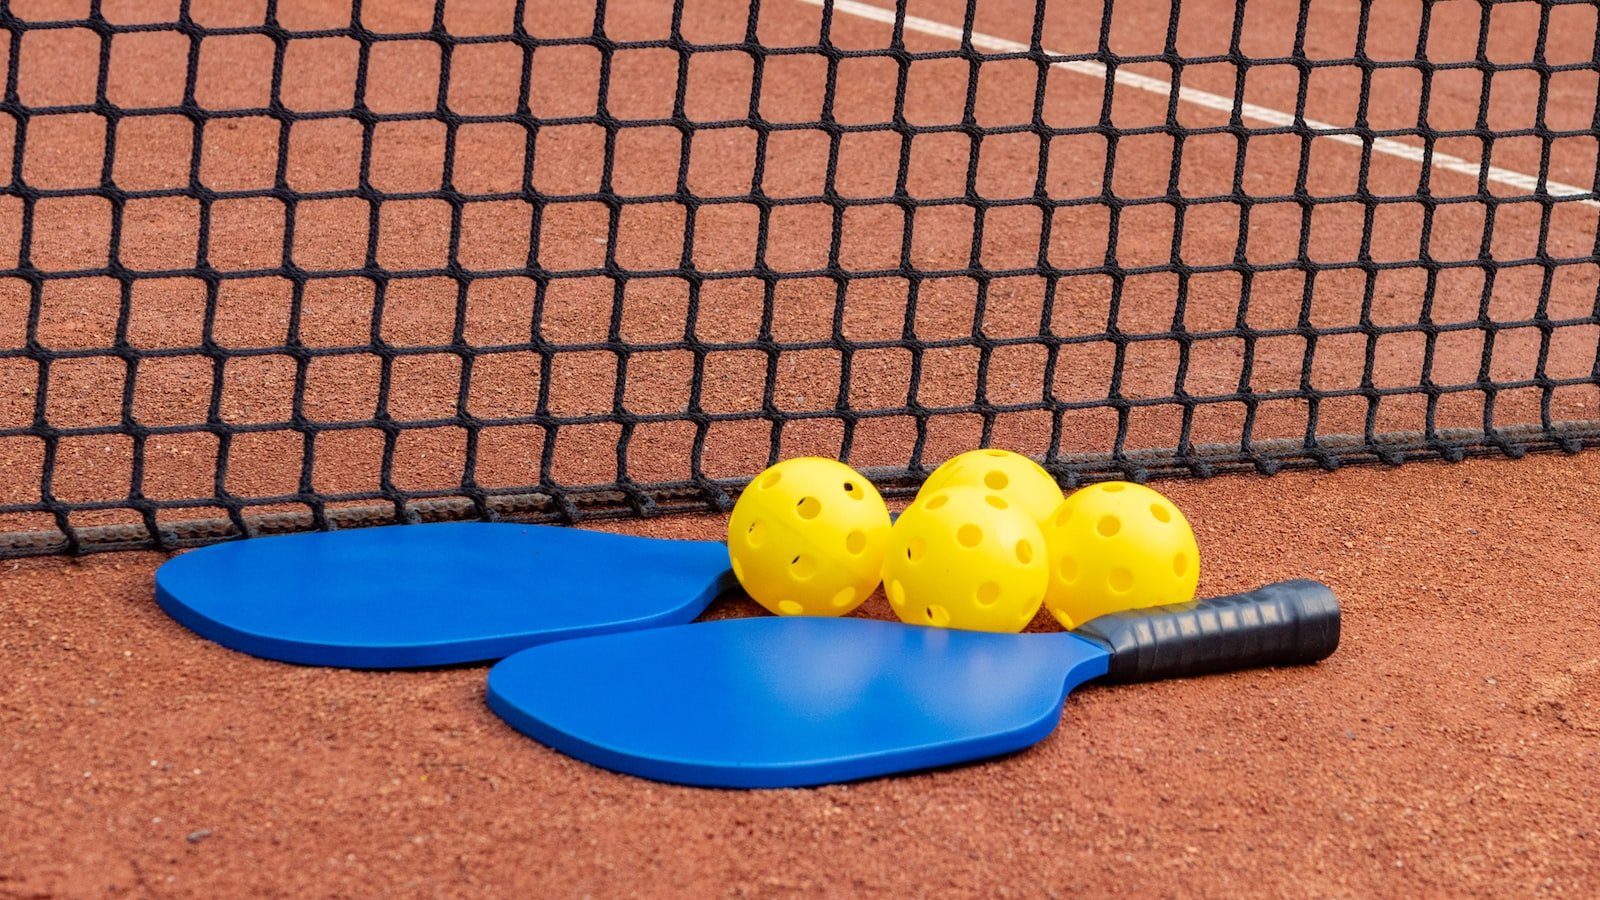 The Connection Between Pickleball and Mental Resilience